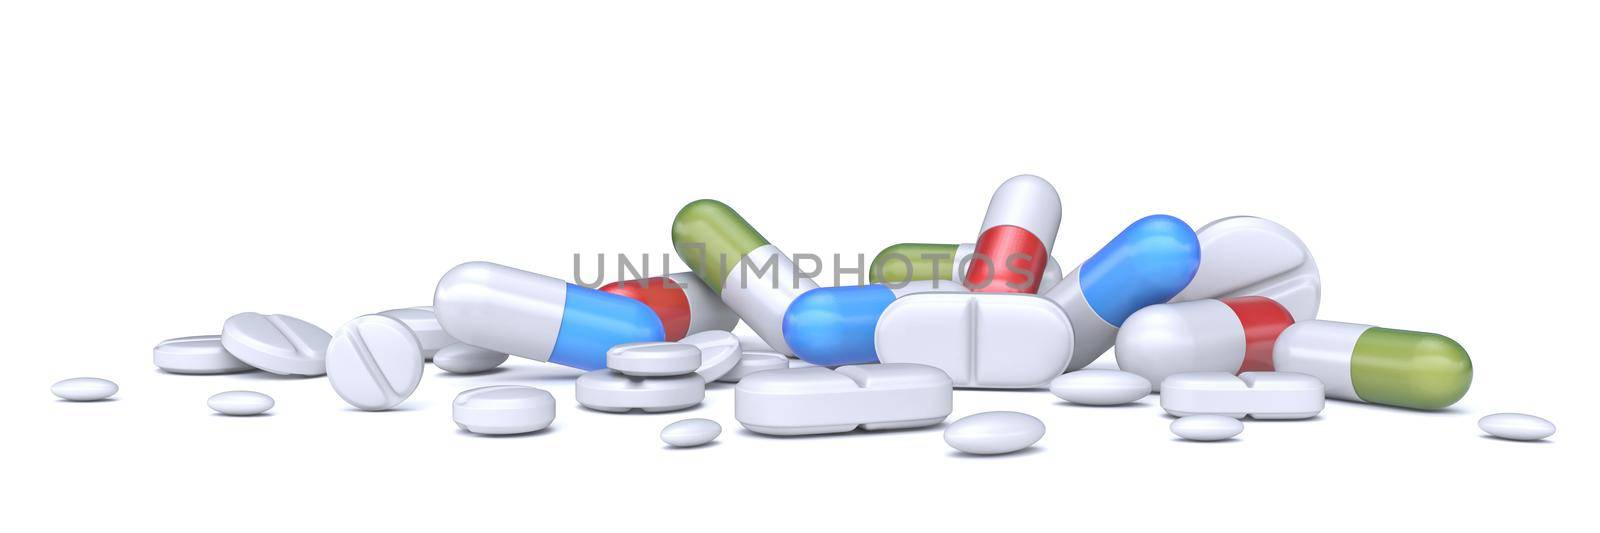 Pile of pills, tablets and capsules 3D rendering illustration isolated on white background